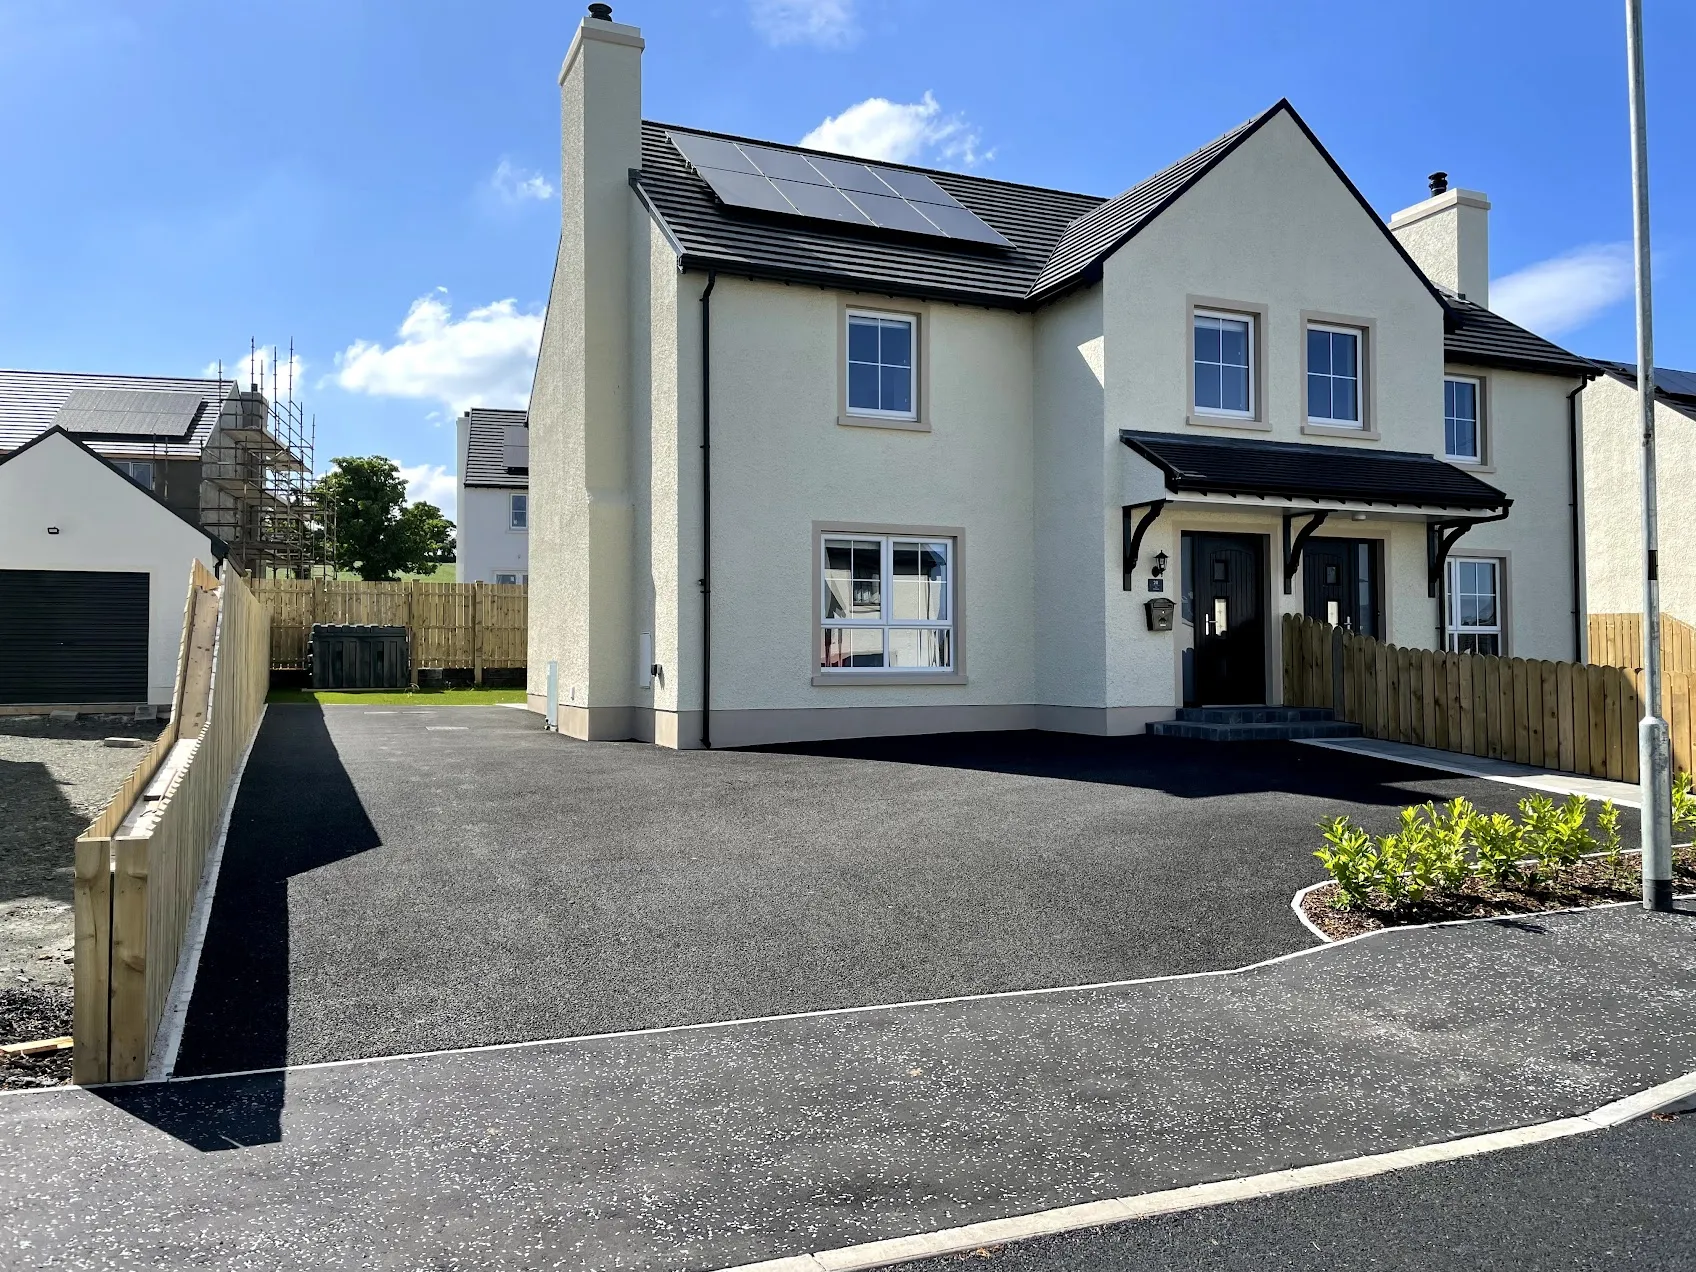 Picture of a house in Ballycastle built by McHenry Bros